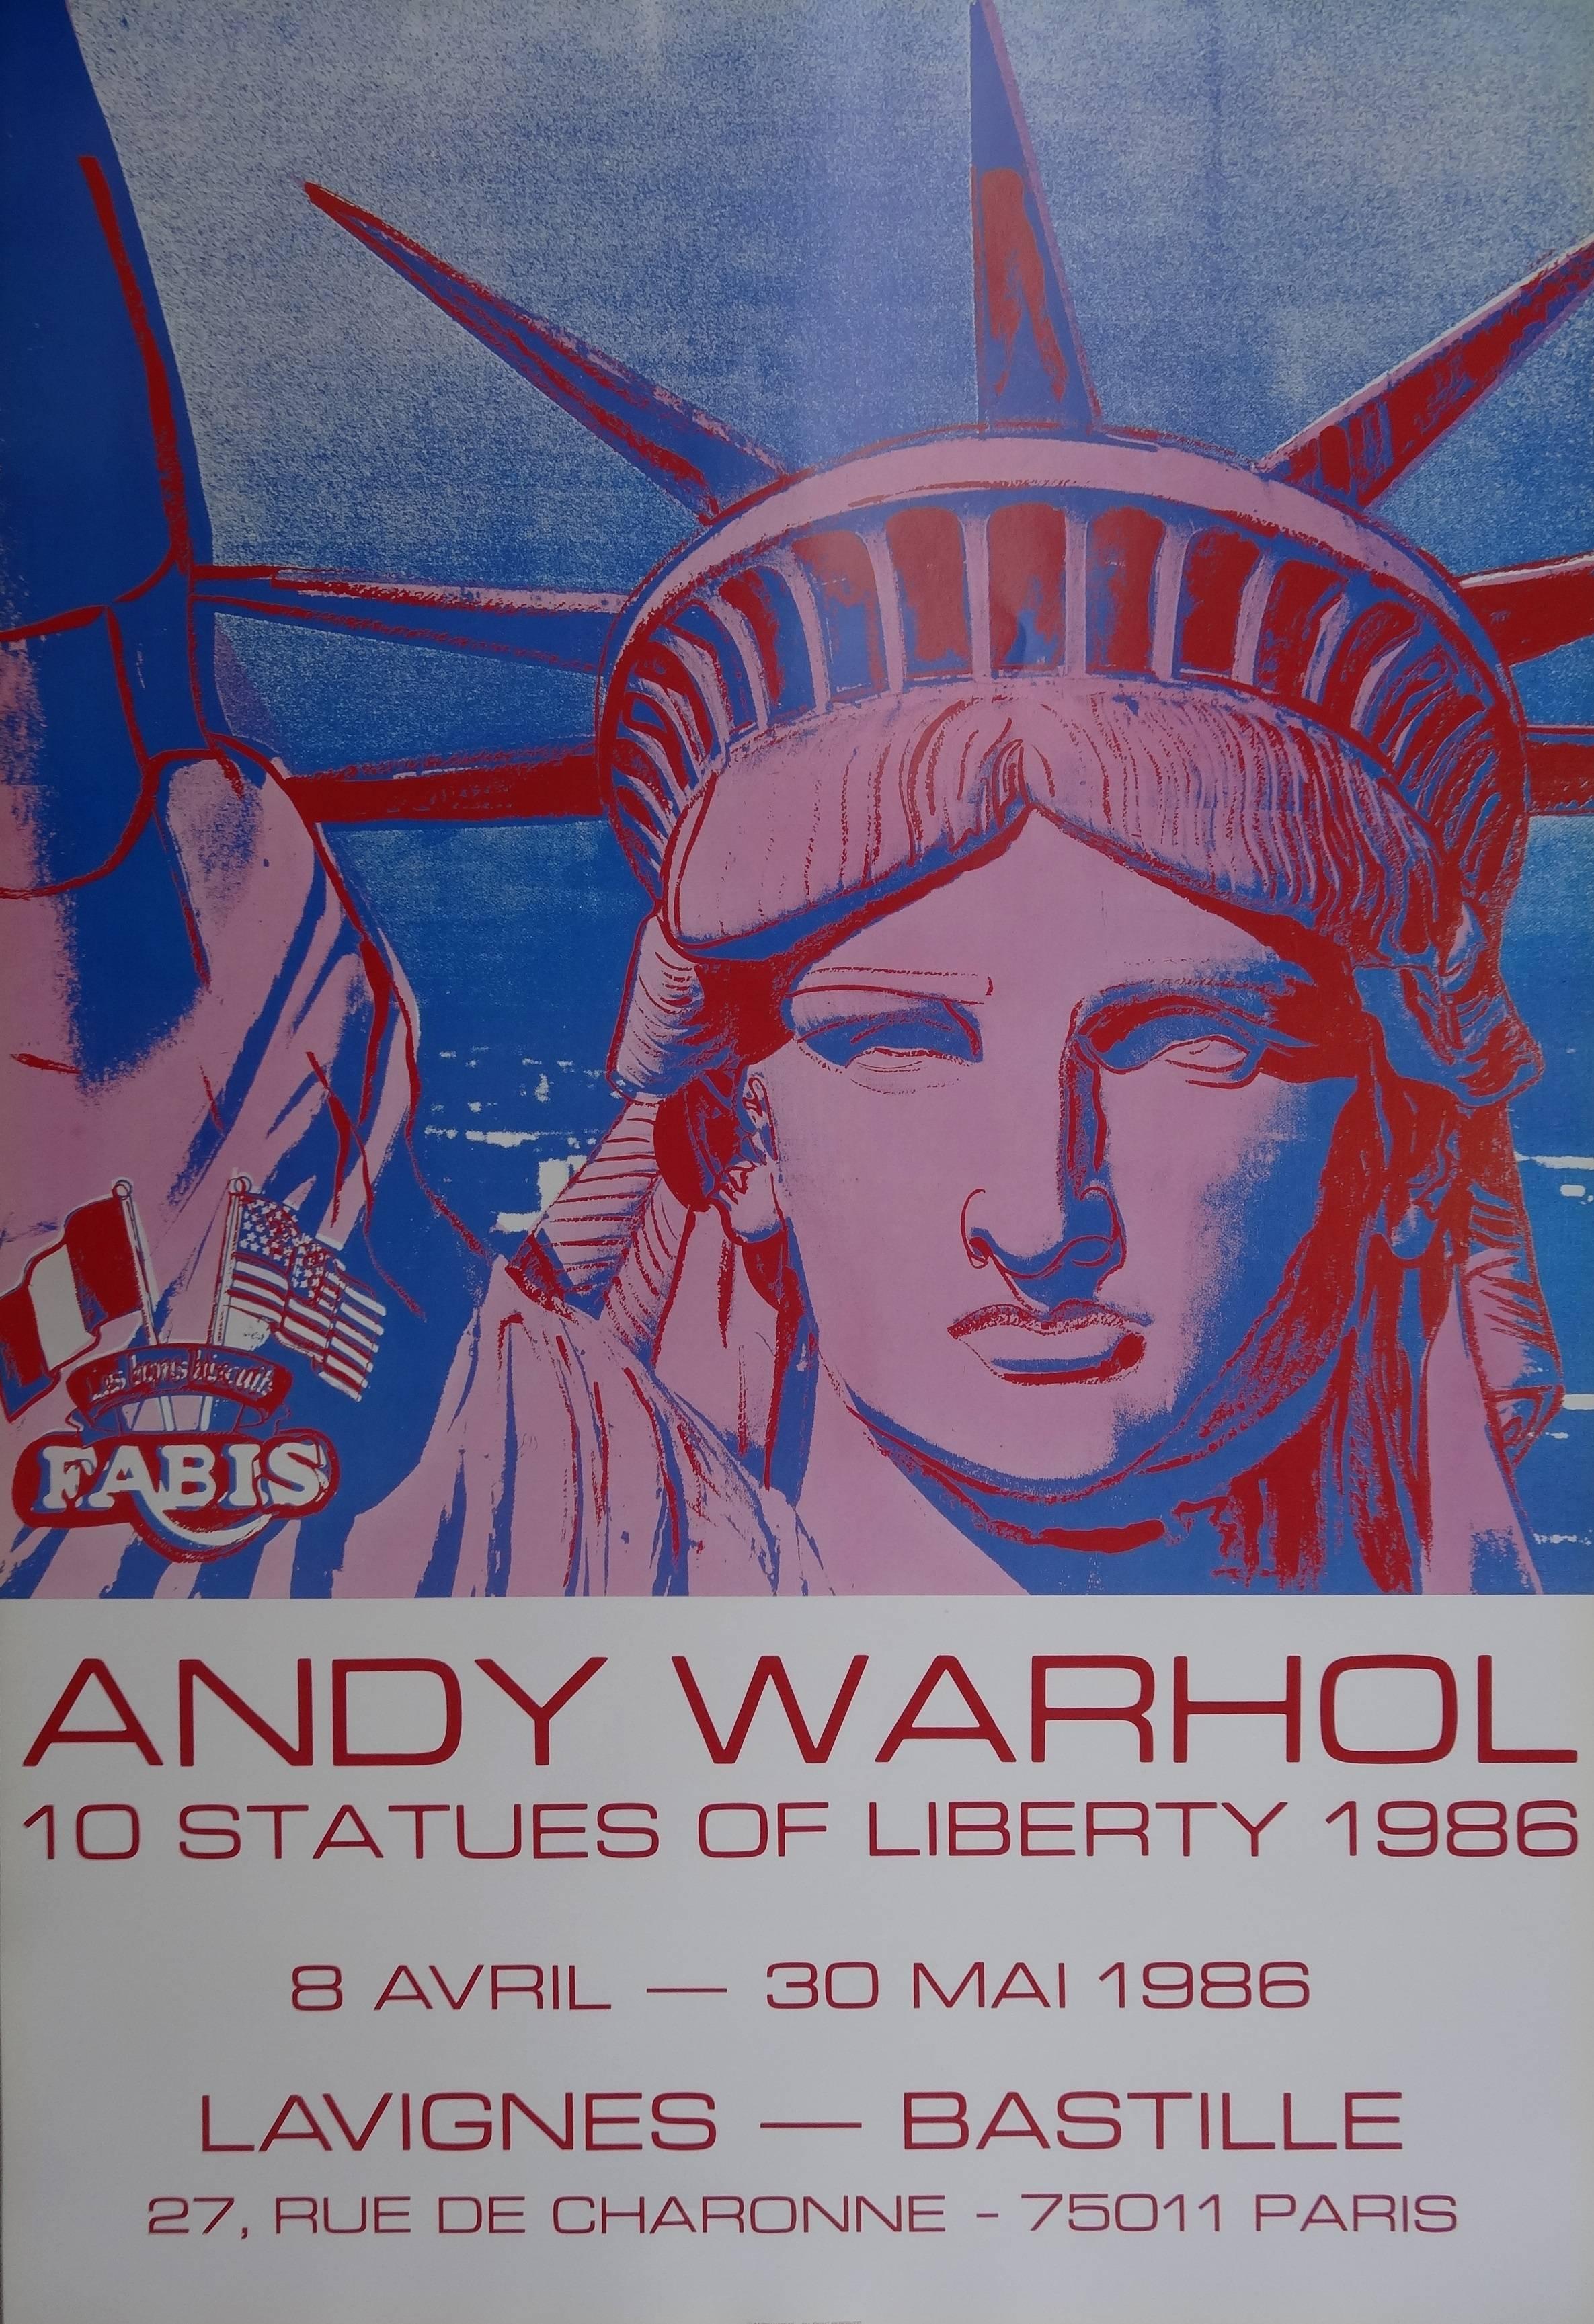 Andy Warhol Portrait Print - 10 Statues of Liberty - Vintage Poster - 1986